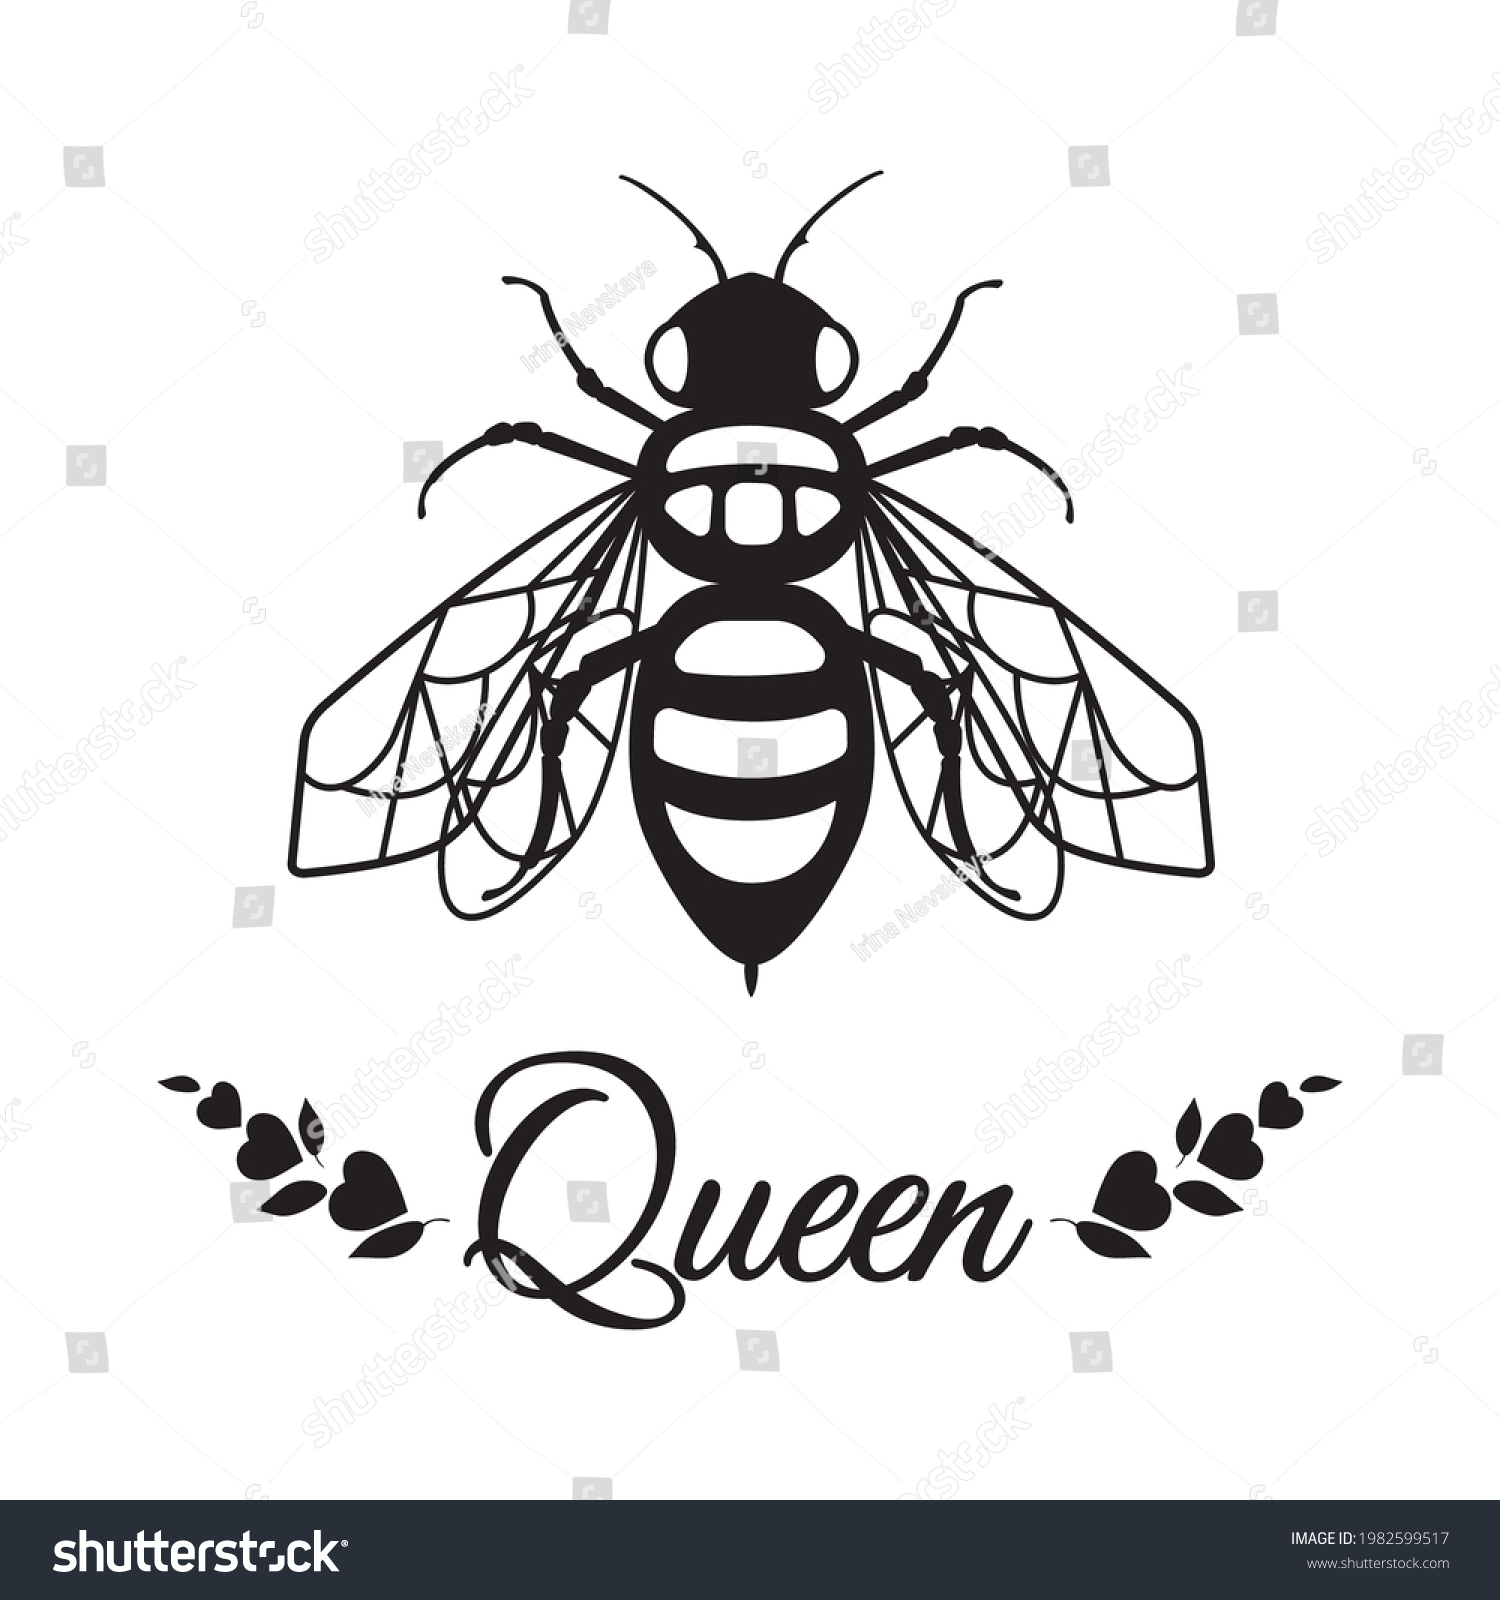 SVG of Honey bee isolated on white background. Vector illustration depicting an insect. For the Day of Protection of Bees. Save the bees. Suitable for cutting SVG files on plotter. Bumblebee for shirt design svg